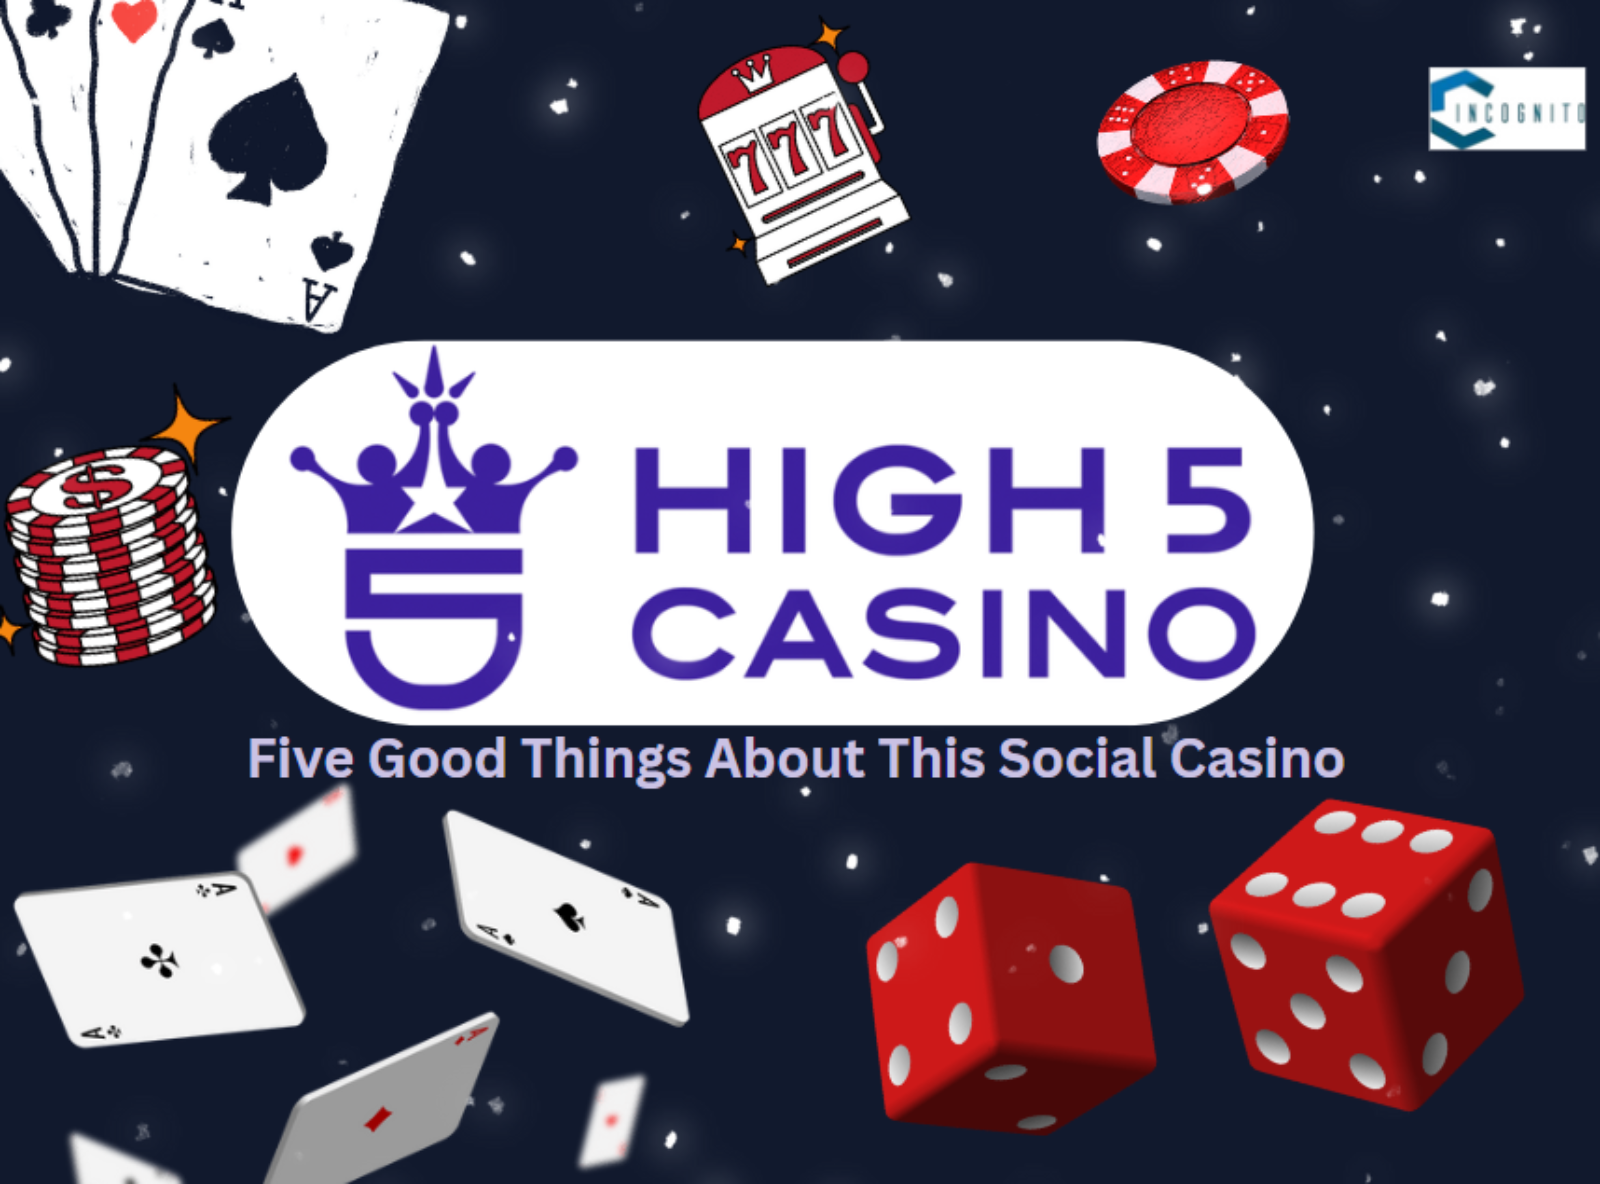 High 5 Casino: Five Good Things About This Social Casino